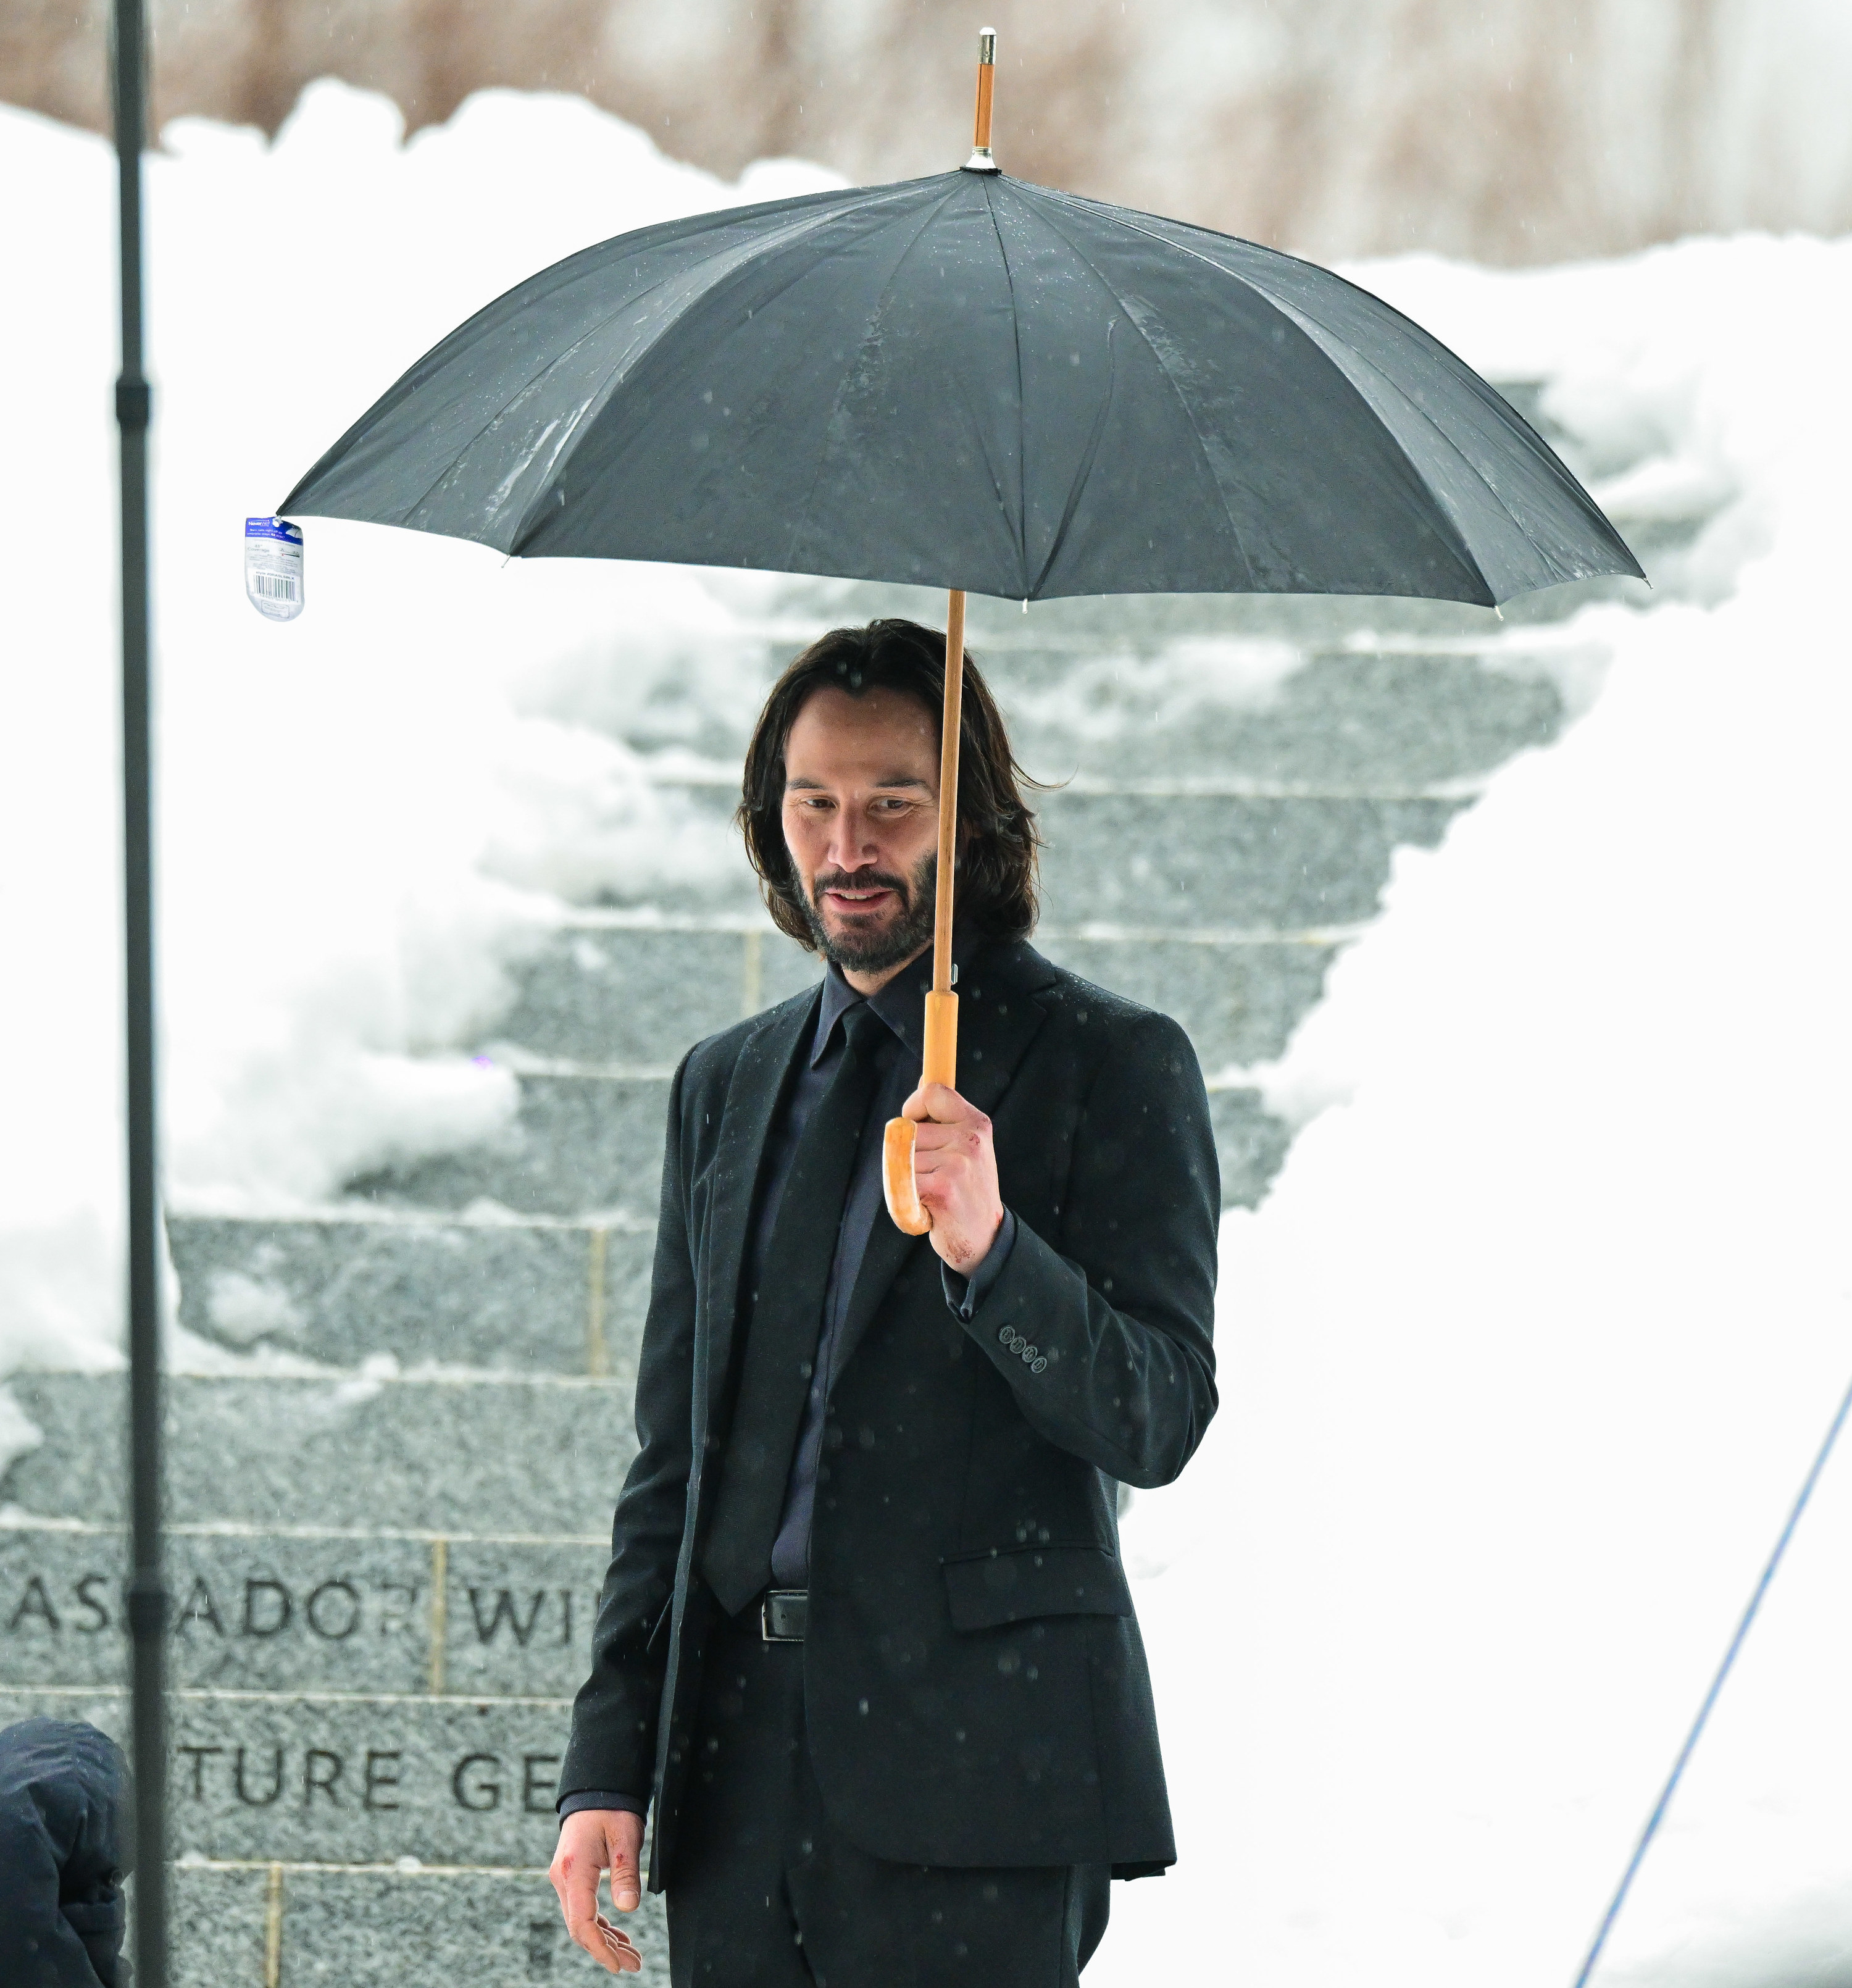 Keanu smiling while holding an umbrella in the snow